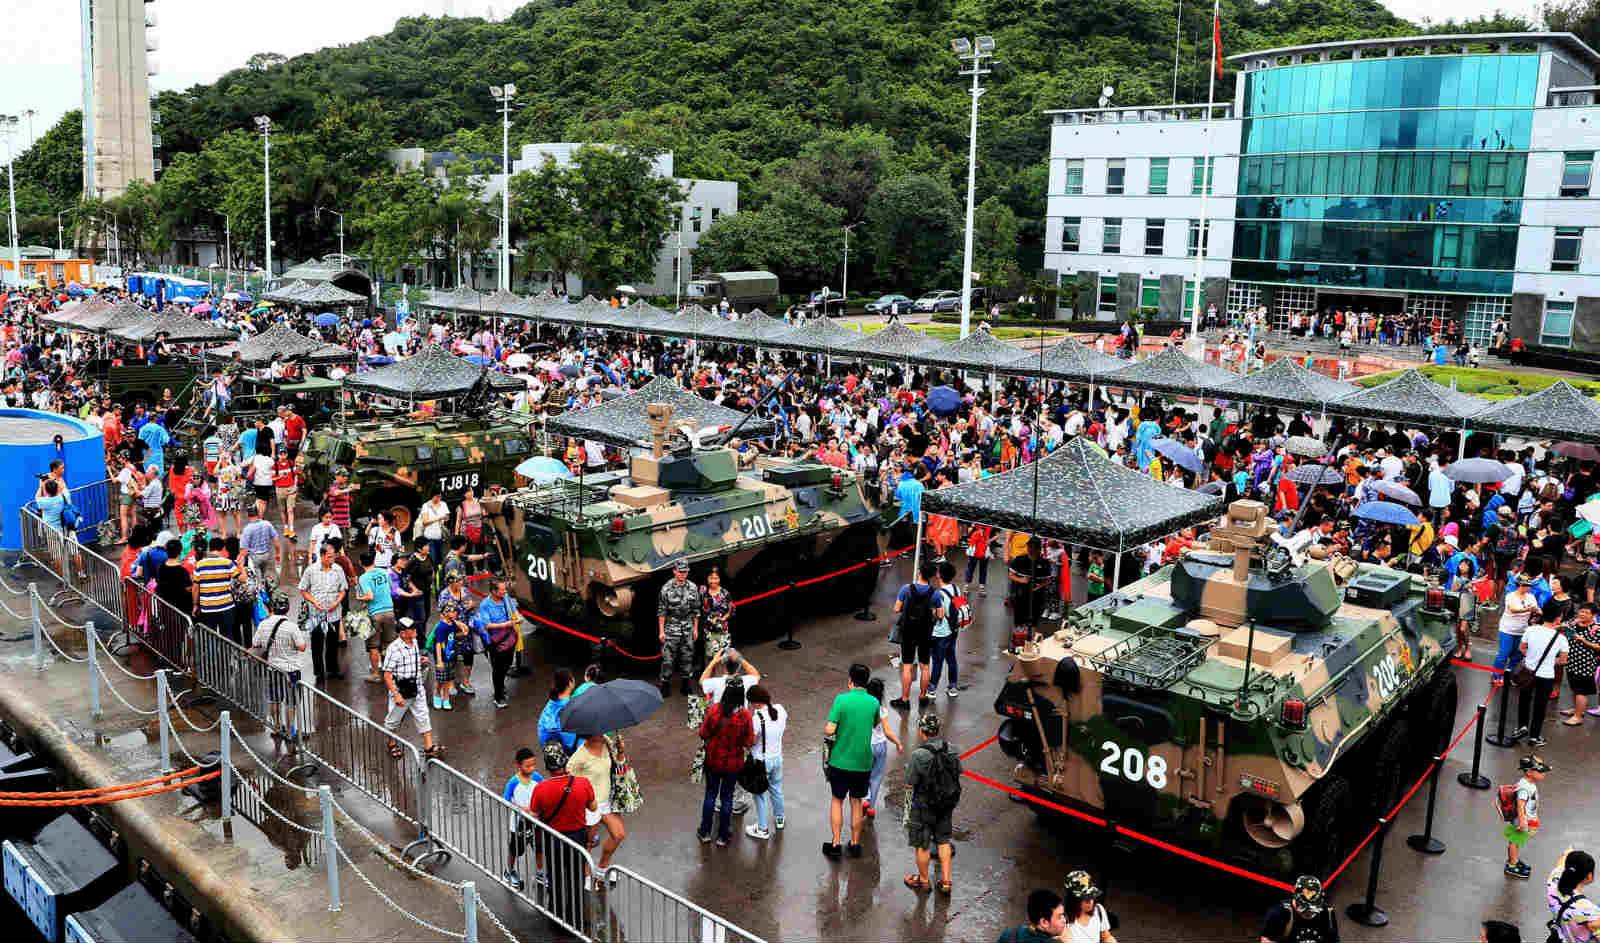 Local residents visit weapons of the PLA Hong Kong Garrison on the camp-open day in the Ngong Shuen Chau Barracks. In order to celebrate the 20th anniversary of Hong Kong's return to the motherland, the Ngong Shuen Chau Barracks of the PLA Hong Kong Garrison held the camp-open day activities on the morning of July 8, 2017. (eng.chinamil.com.cn/Photo by Zhou Hanqing)